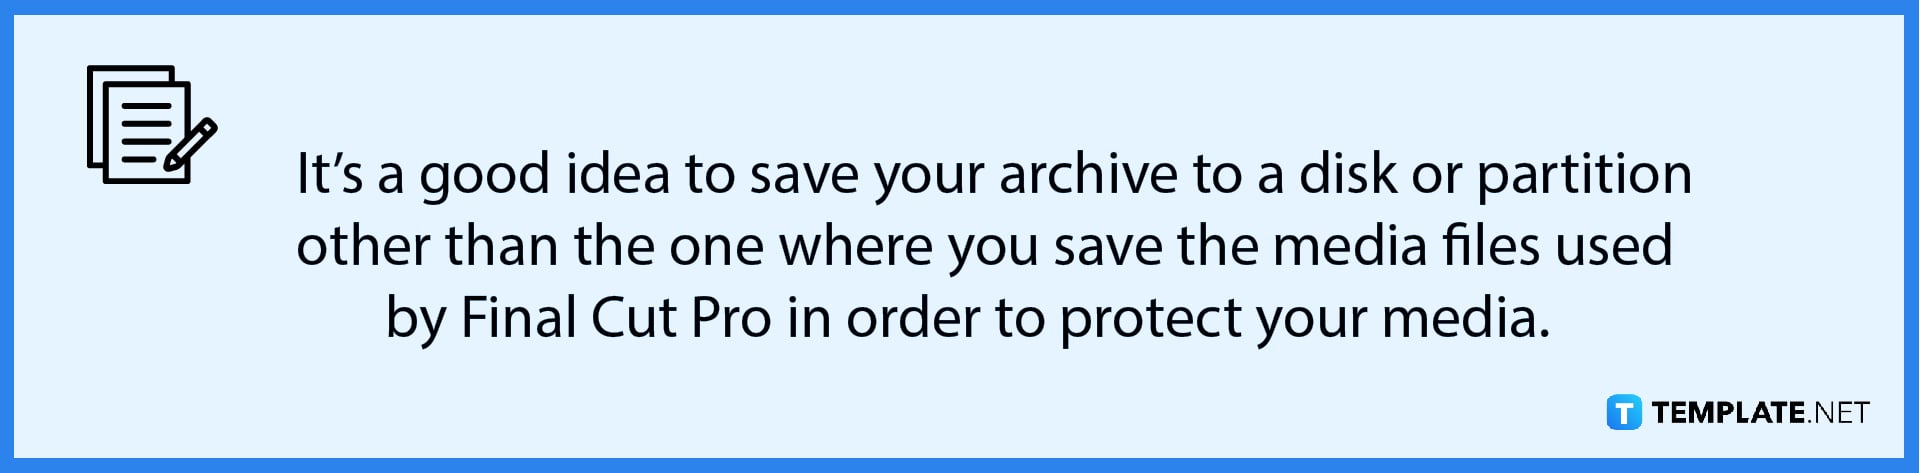 how-to-create-camera-archives-in-apple-final-cut-pro-note-01